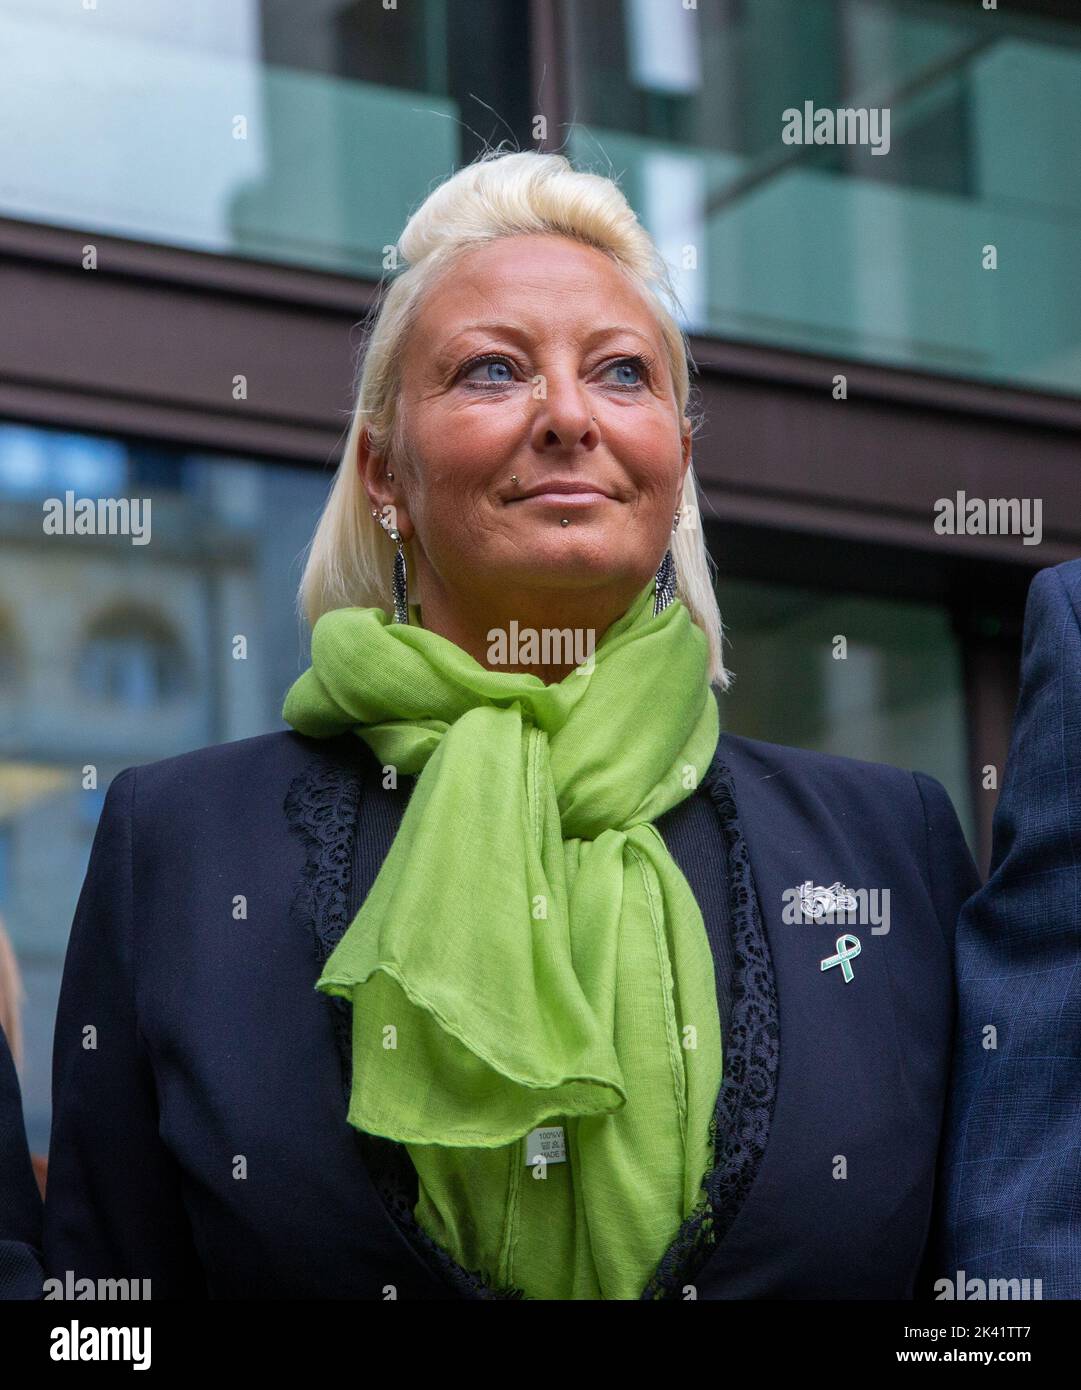 London, England, UK. 29th Sep, 2022. Harry Dunn's mother CHARLOTTE CHARLES is een outside Westminster Magistrates' Court. Harry Dunn was killed in a car accident by an American diplomat's wife Anne Sacoolas outside the US military base RAF Croughton in Northamptonshire on 27 August 2019. Sacoolas participated in first trial session from US by video link. (Credit Image: © Tayfun Salci/ZUMA Press Wire) Stock Photo